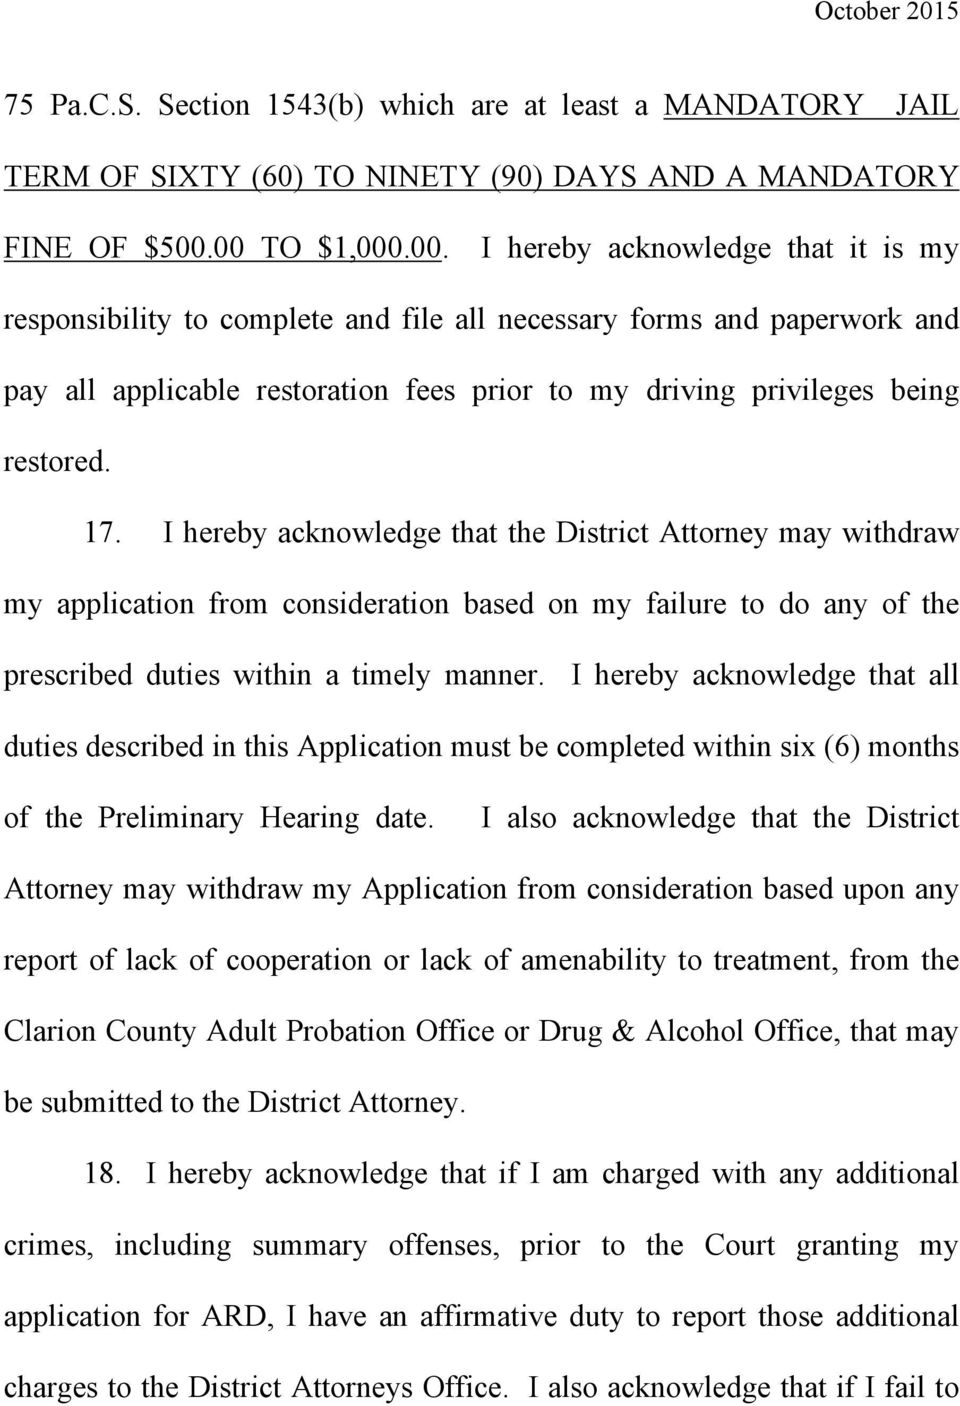 17. I hereby acknowledge that the District Attorney may withdraw my application from consideration based on my failure to do any of the prescribed duties within a timely manner.